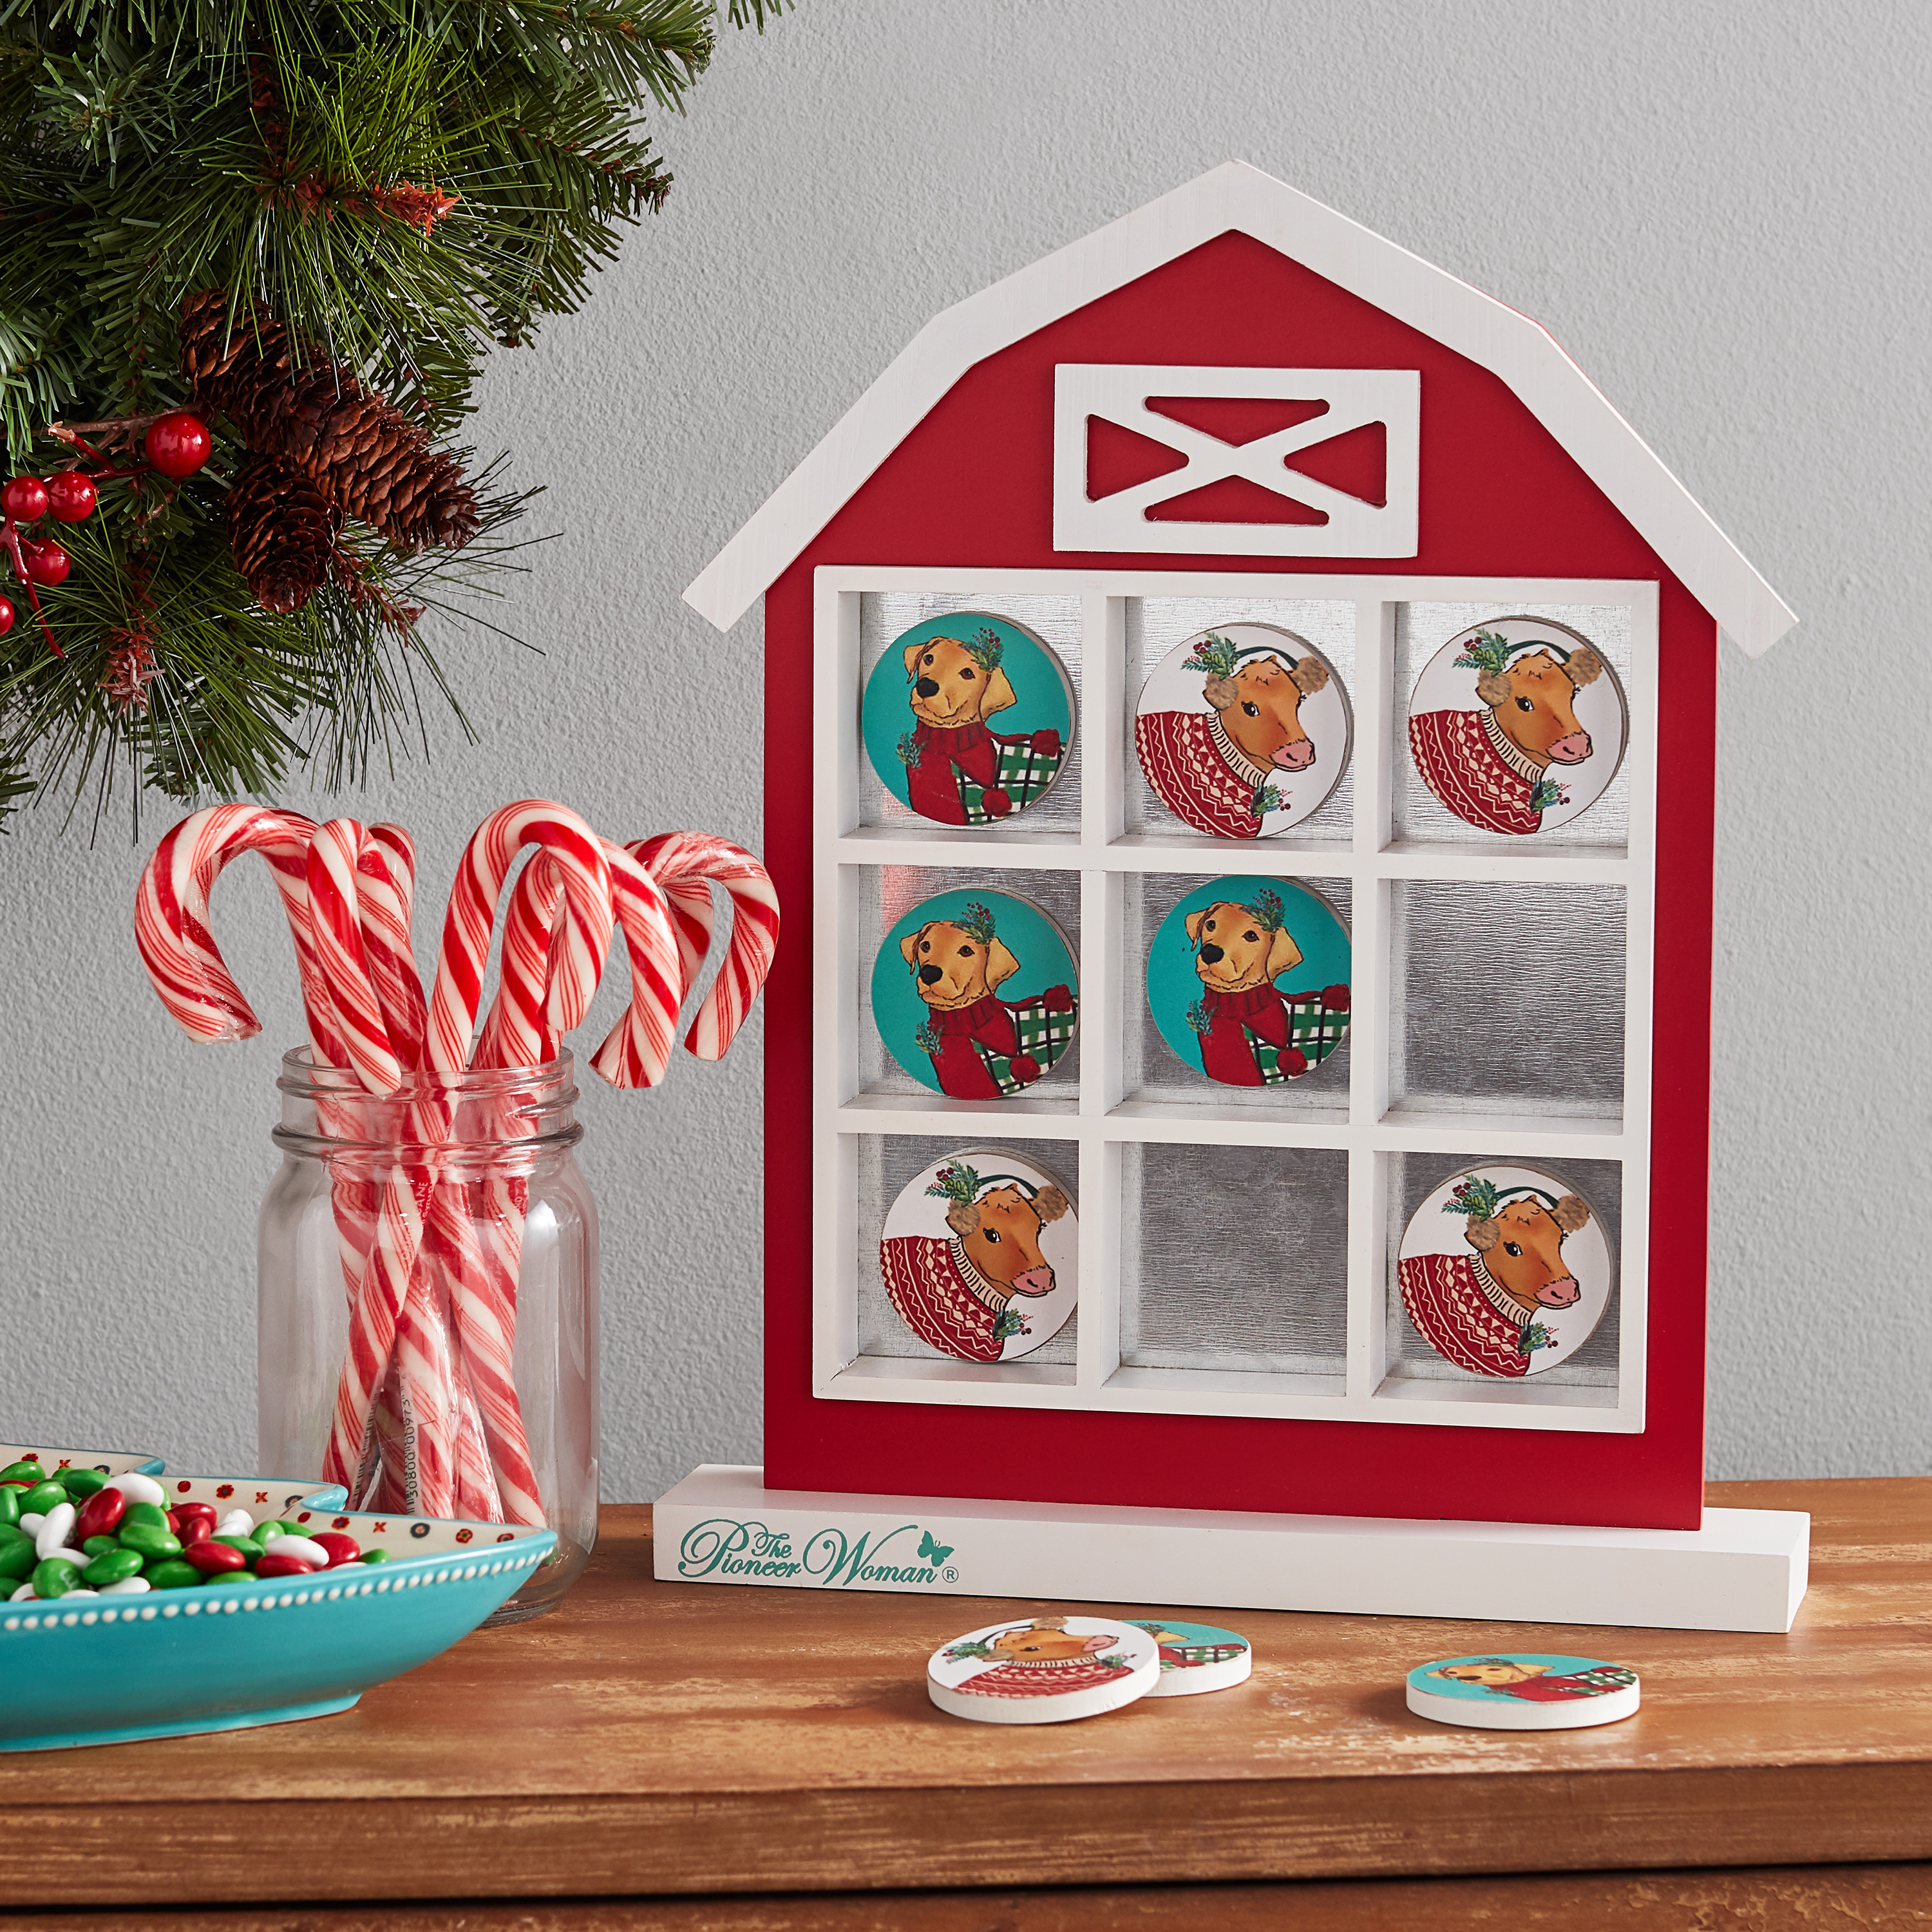 The Pioneer Woman Holiday Barn MDF Tic-Tac-Toe Game - image 2 of 5